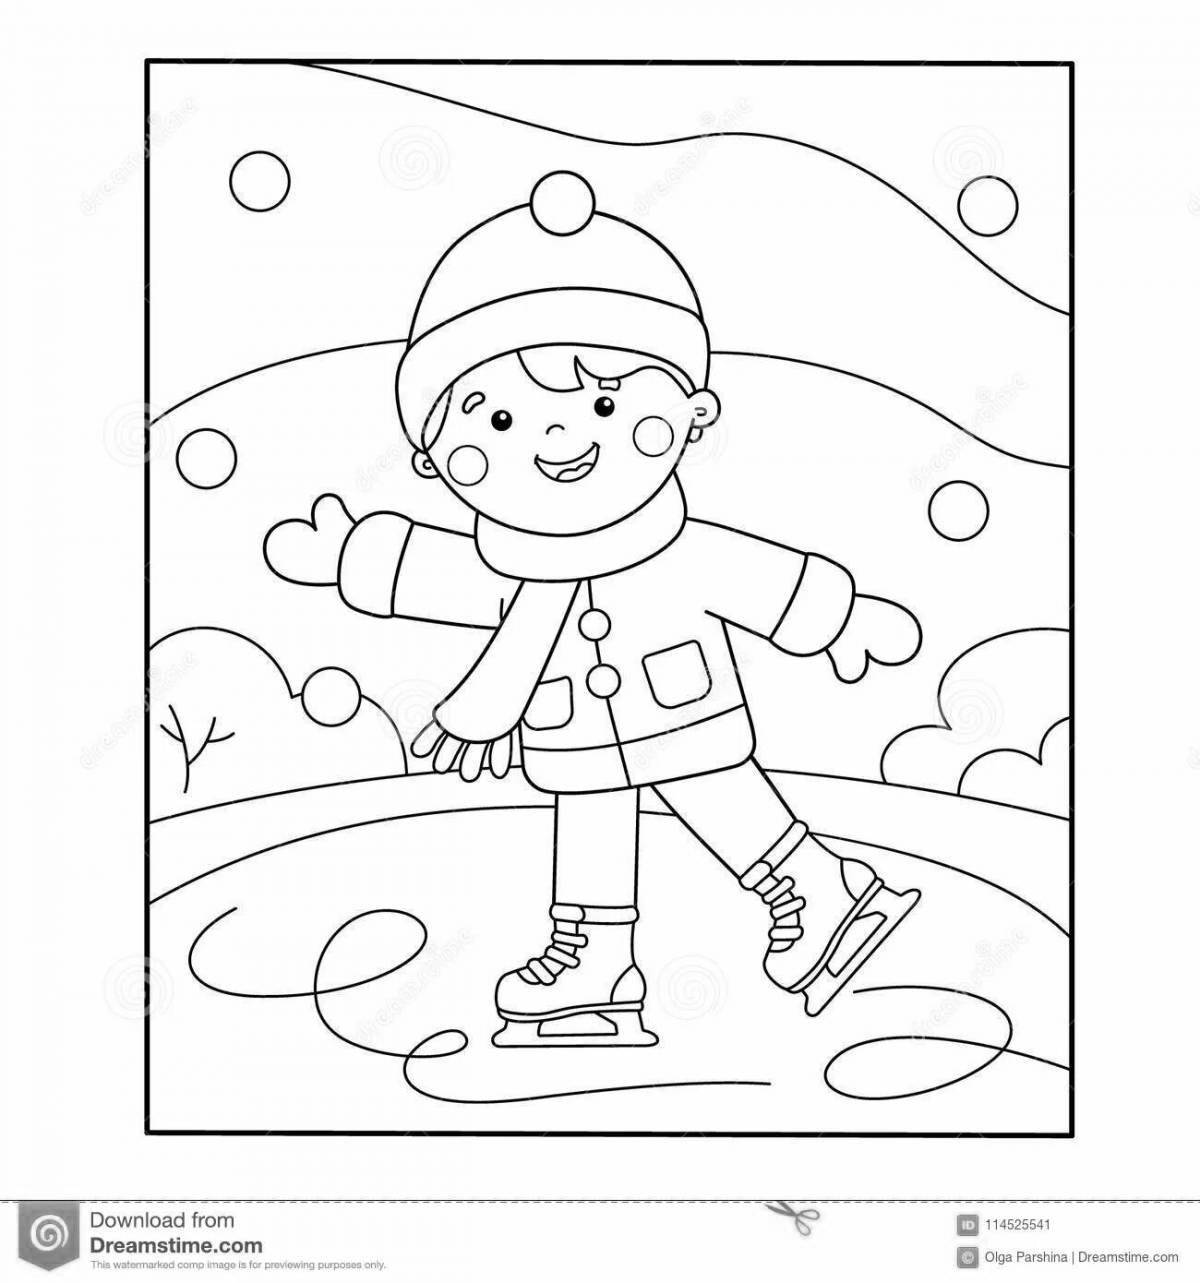 Bright coloring by numbers winter sports